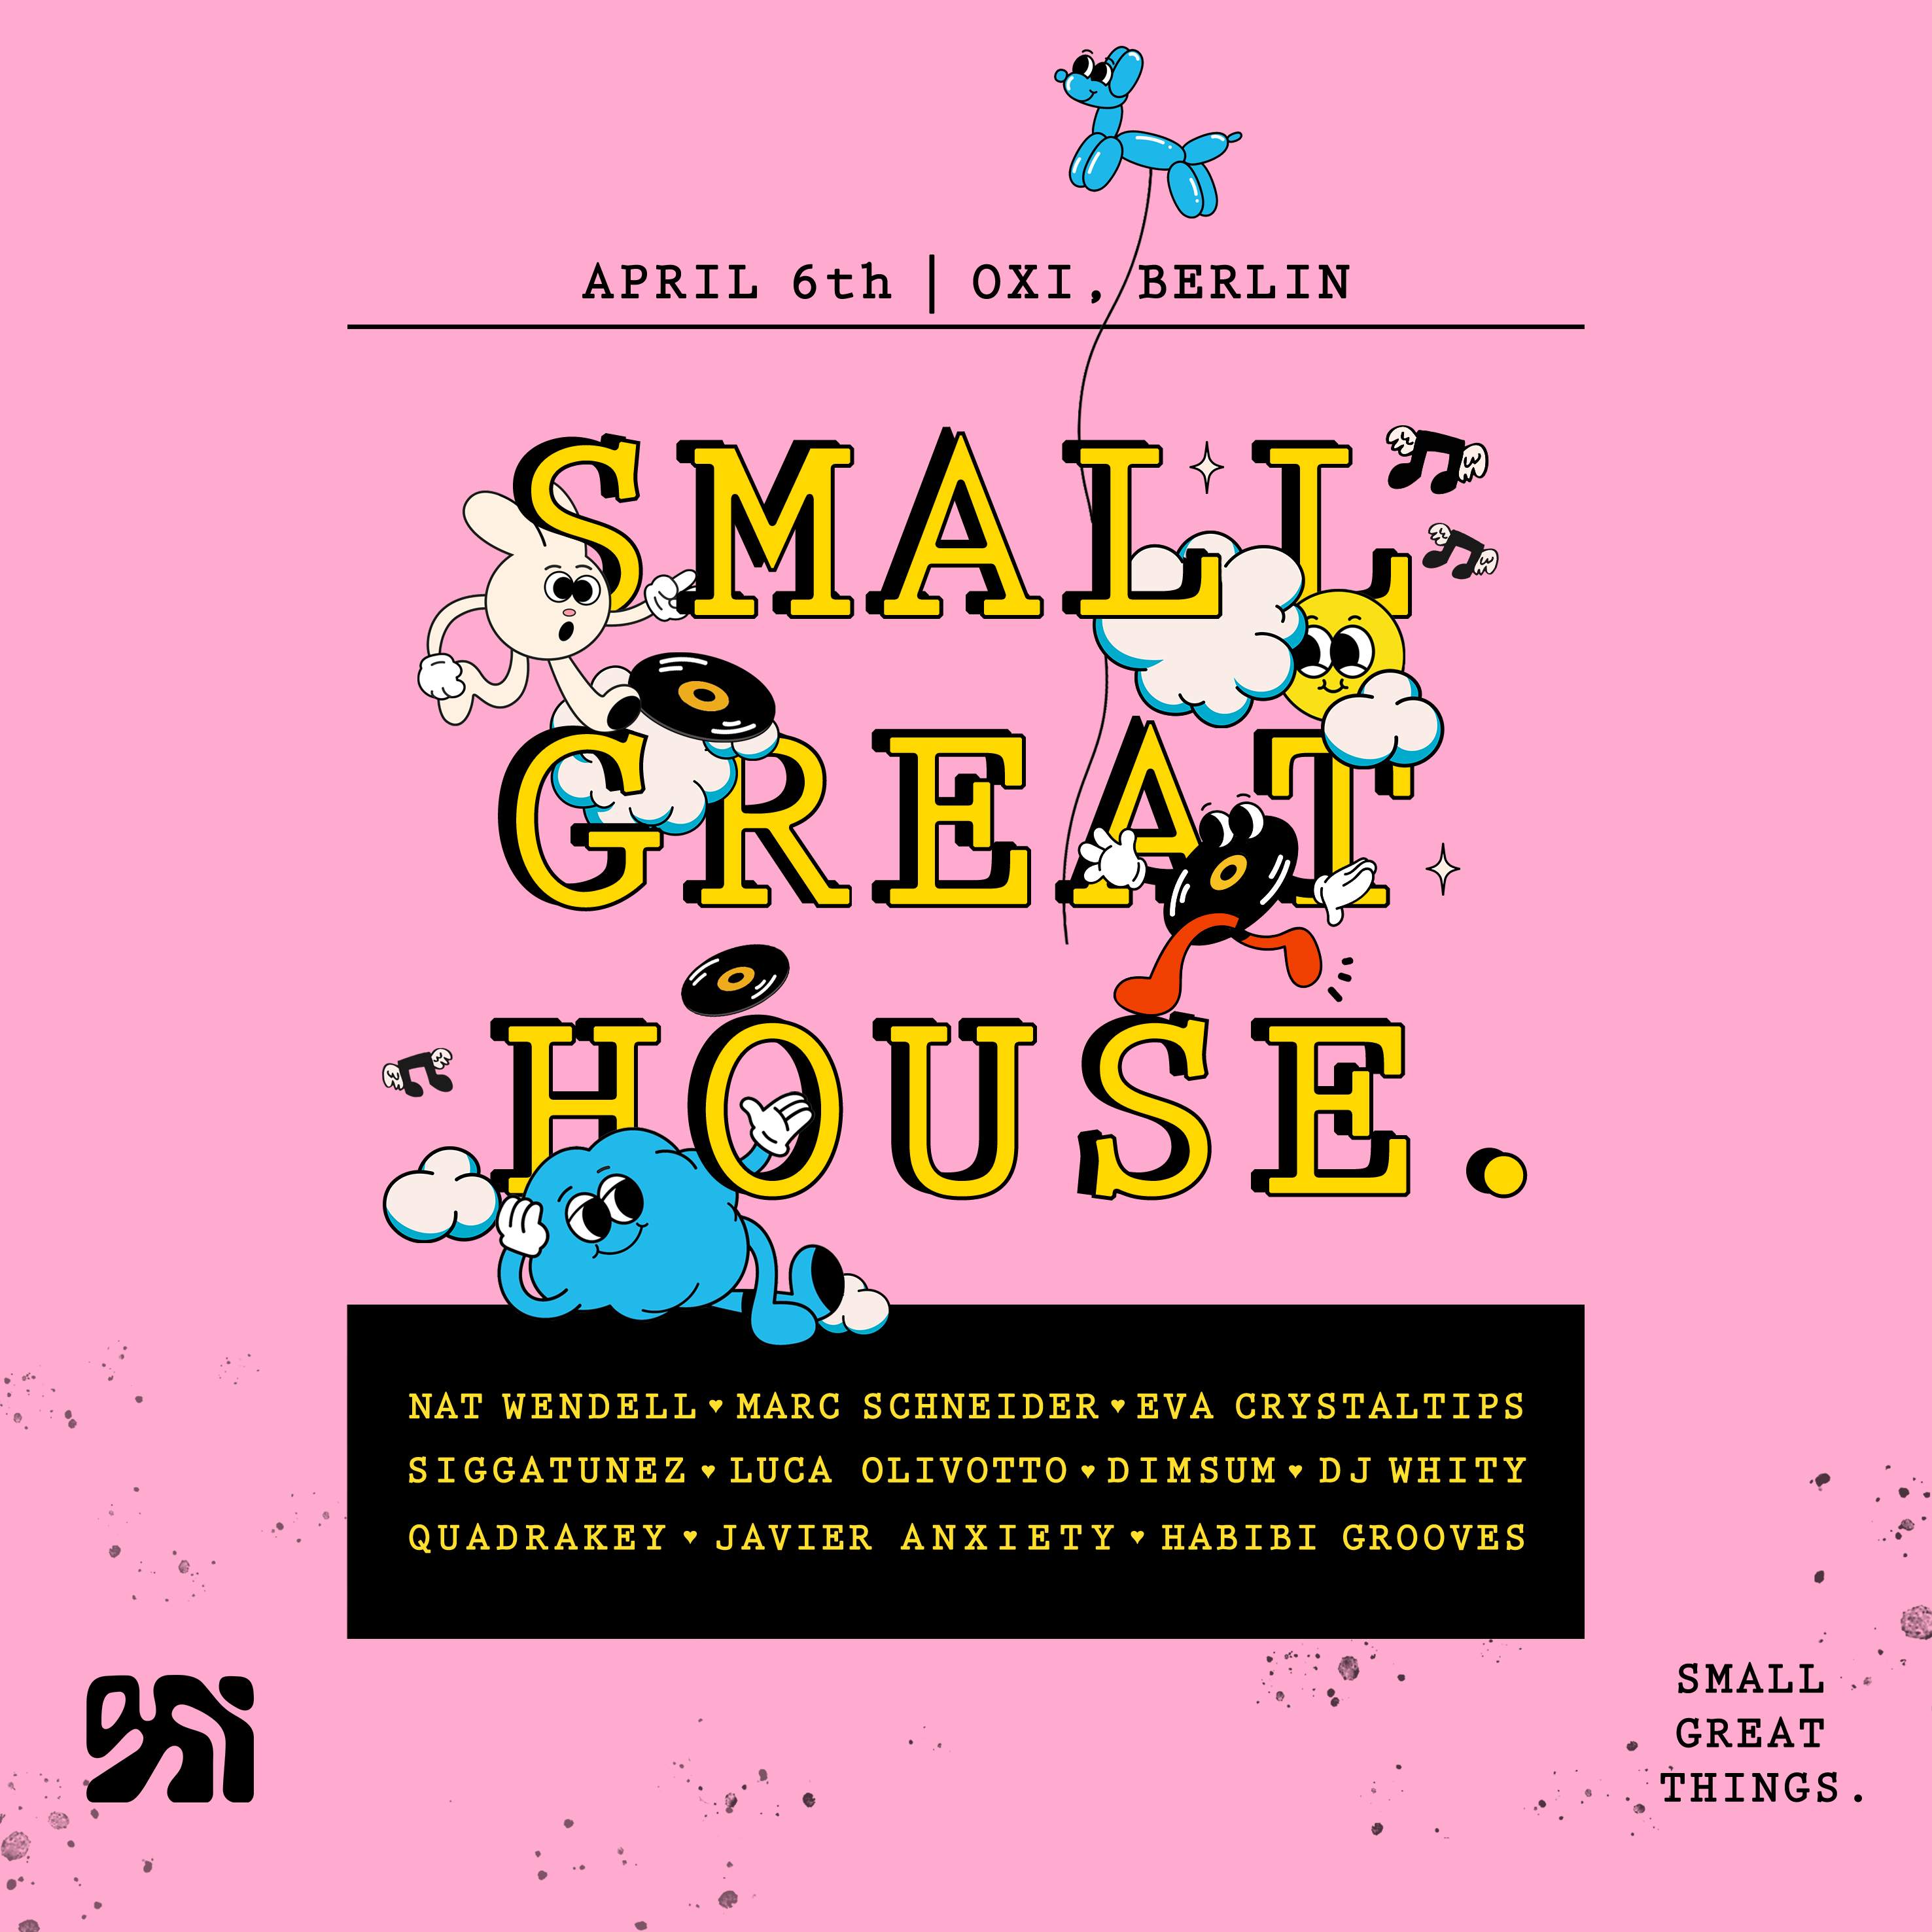 Small Great House (Small Great Things.) - フライヤー裏